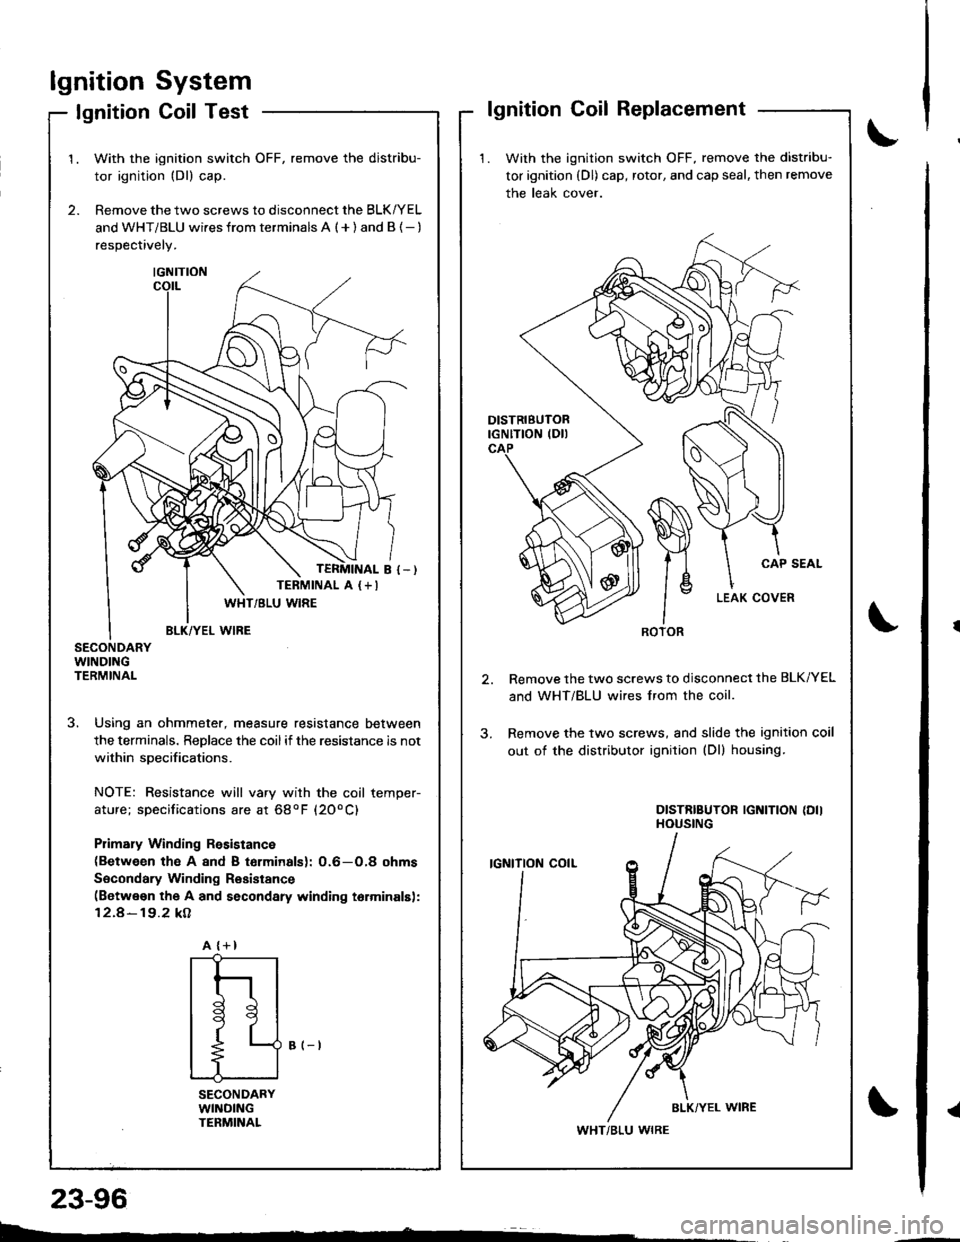 HONDA INTEGRA 1998 4.G Owners Manual lgnitionSystem
Coil TestlgnitionlgnitionCoilReplacement
1. With the ignition switch OFF, remove the distribu-
tor ignition (Dl) cap, rotor, and cap seal, then remove
the leak cover.
Remove the two scr